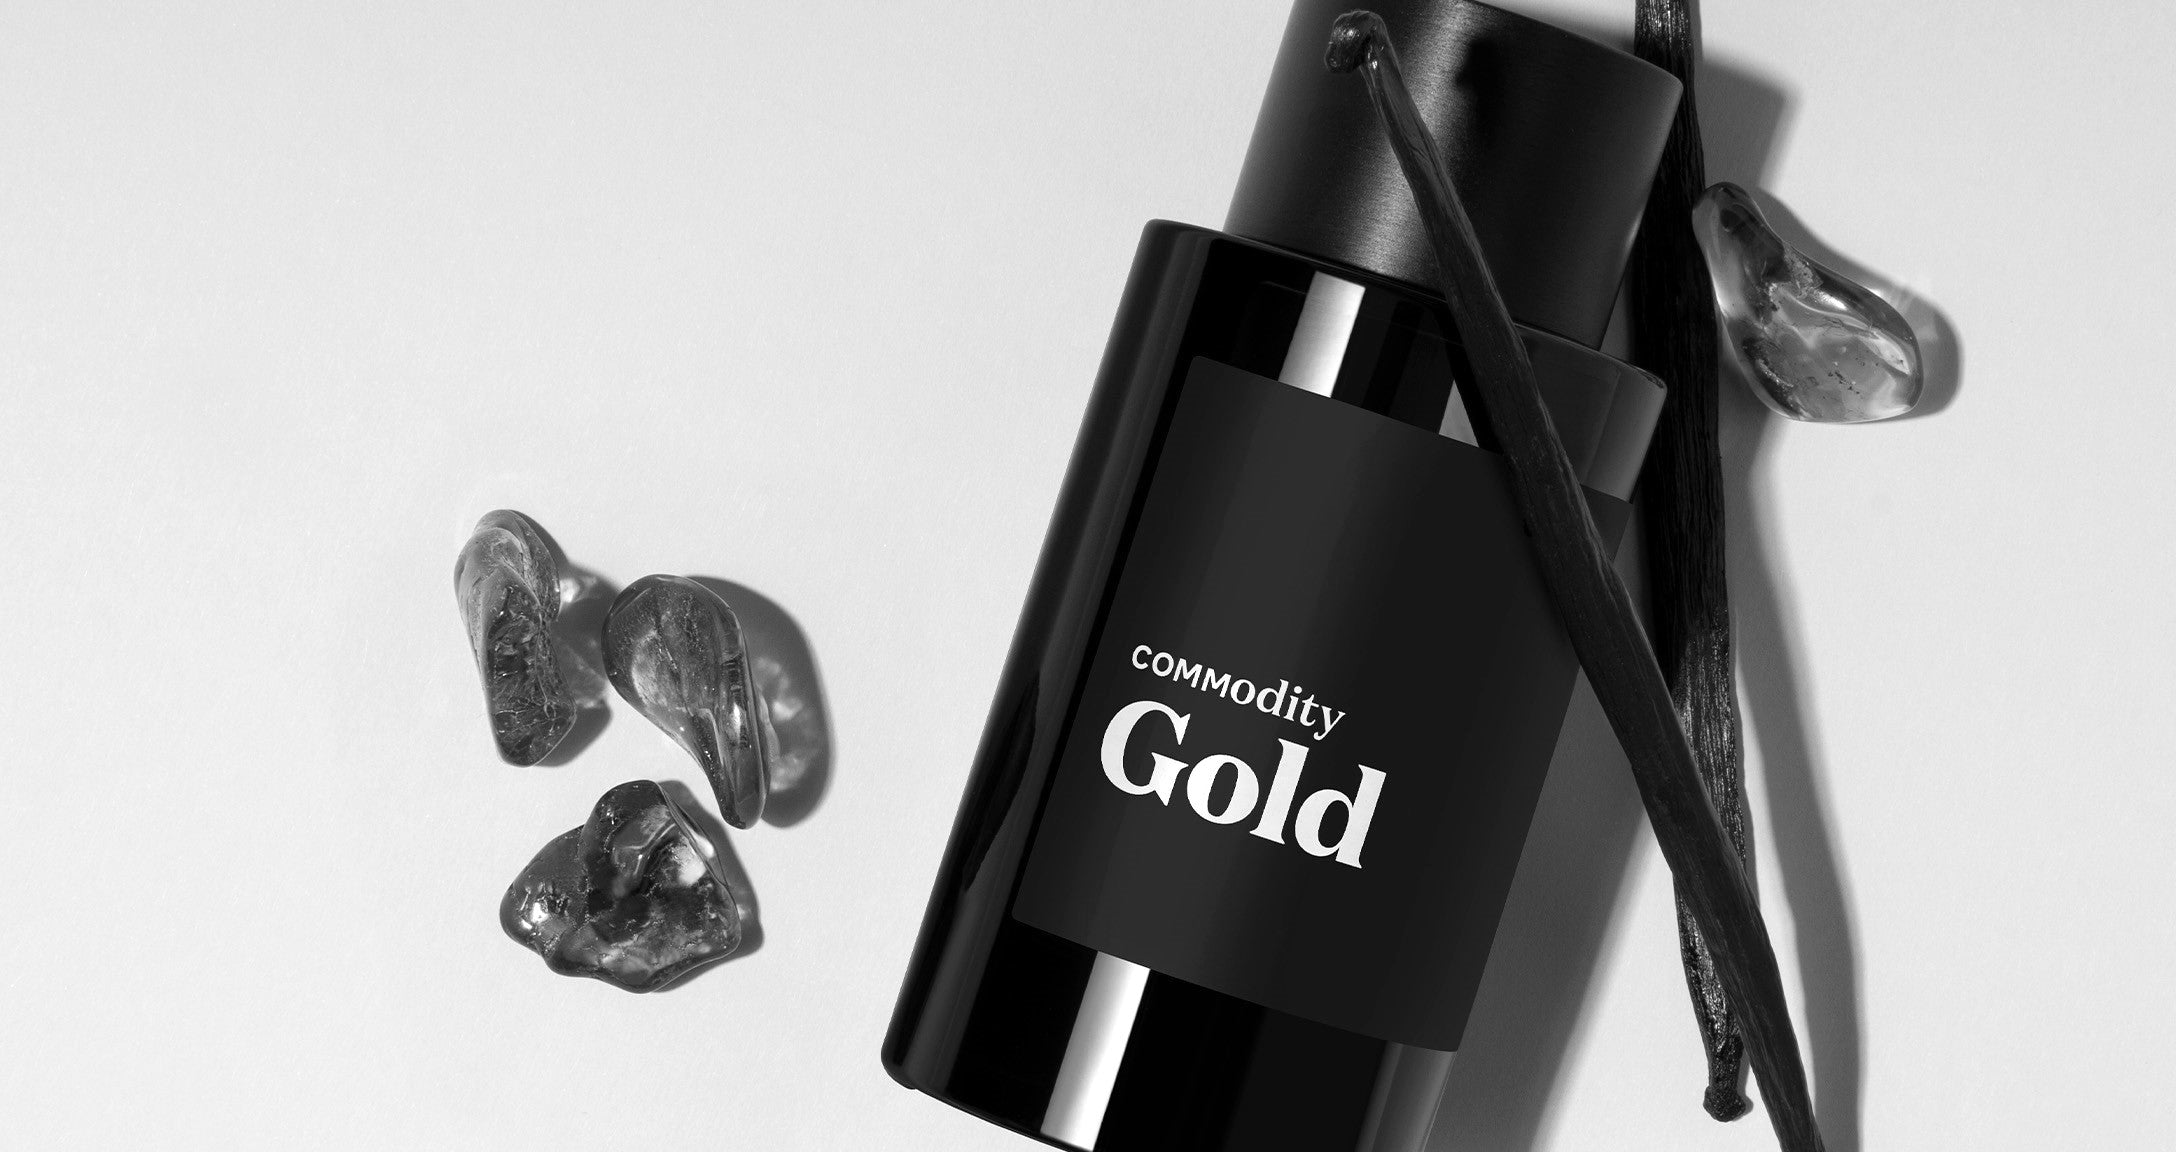 Gold Expressive is The Perfect Vanilla Fragrance–Here's Why